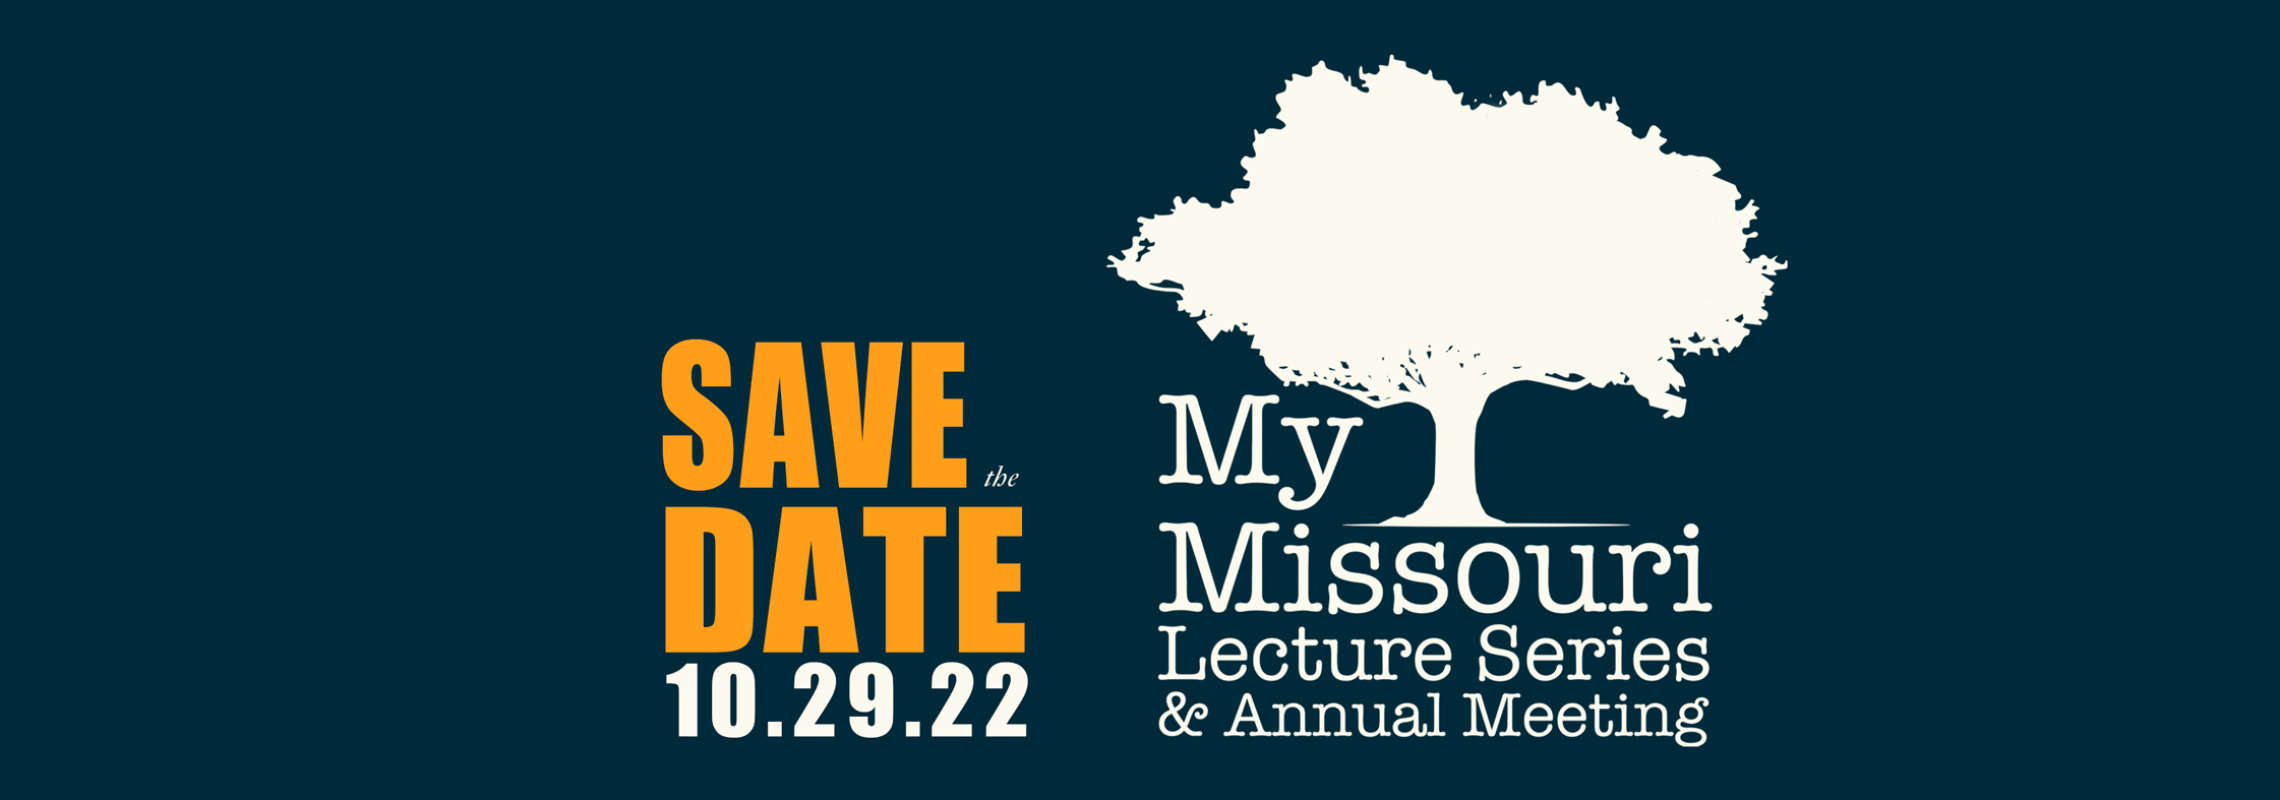 Save the Date Oct. 29, 2022 for the My Missouri Lecture Series and Annual Meeting